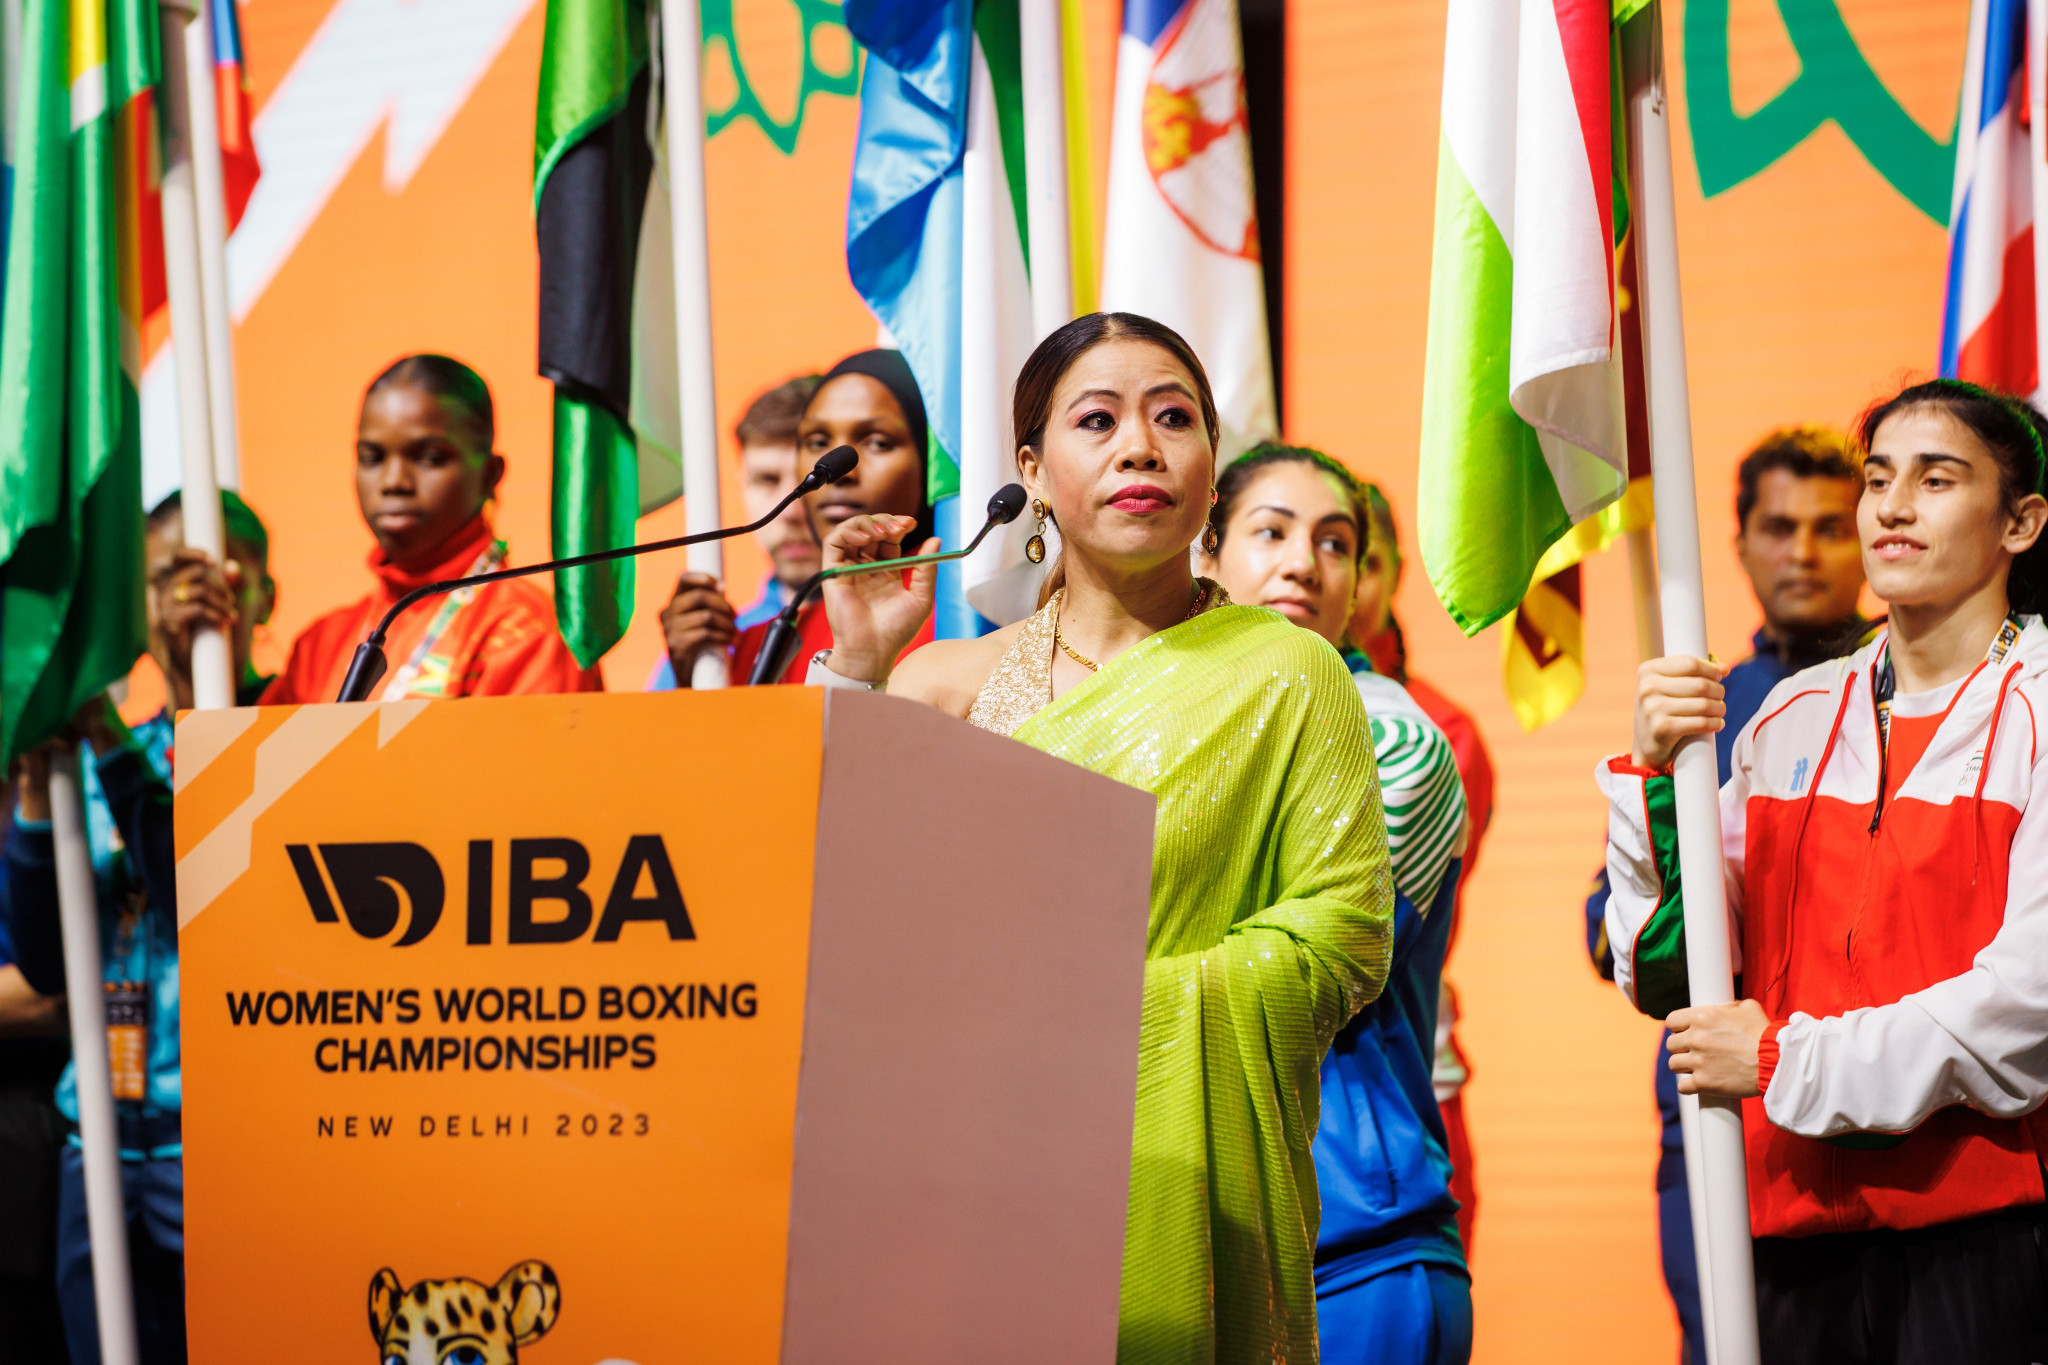 Six-time world champion Mary Kom of India is expected to retire after turning 41 later this year due to the IBA's age rules ©IBA